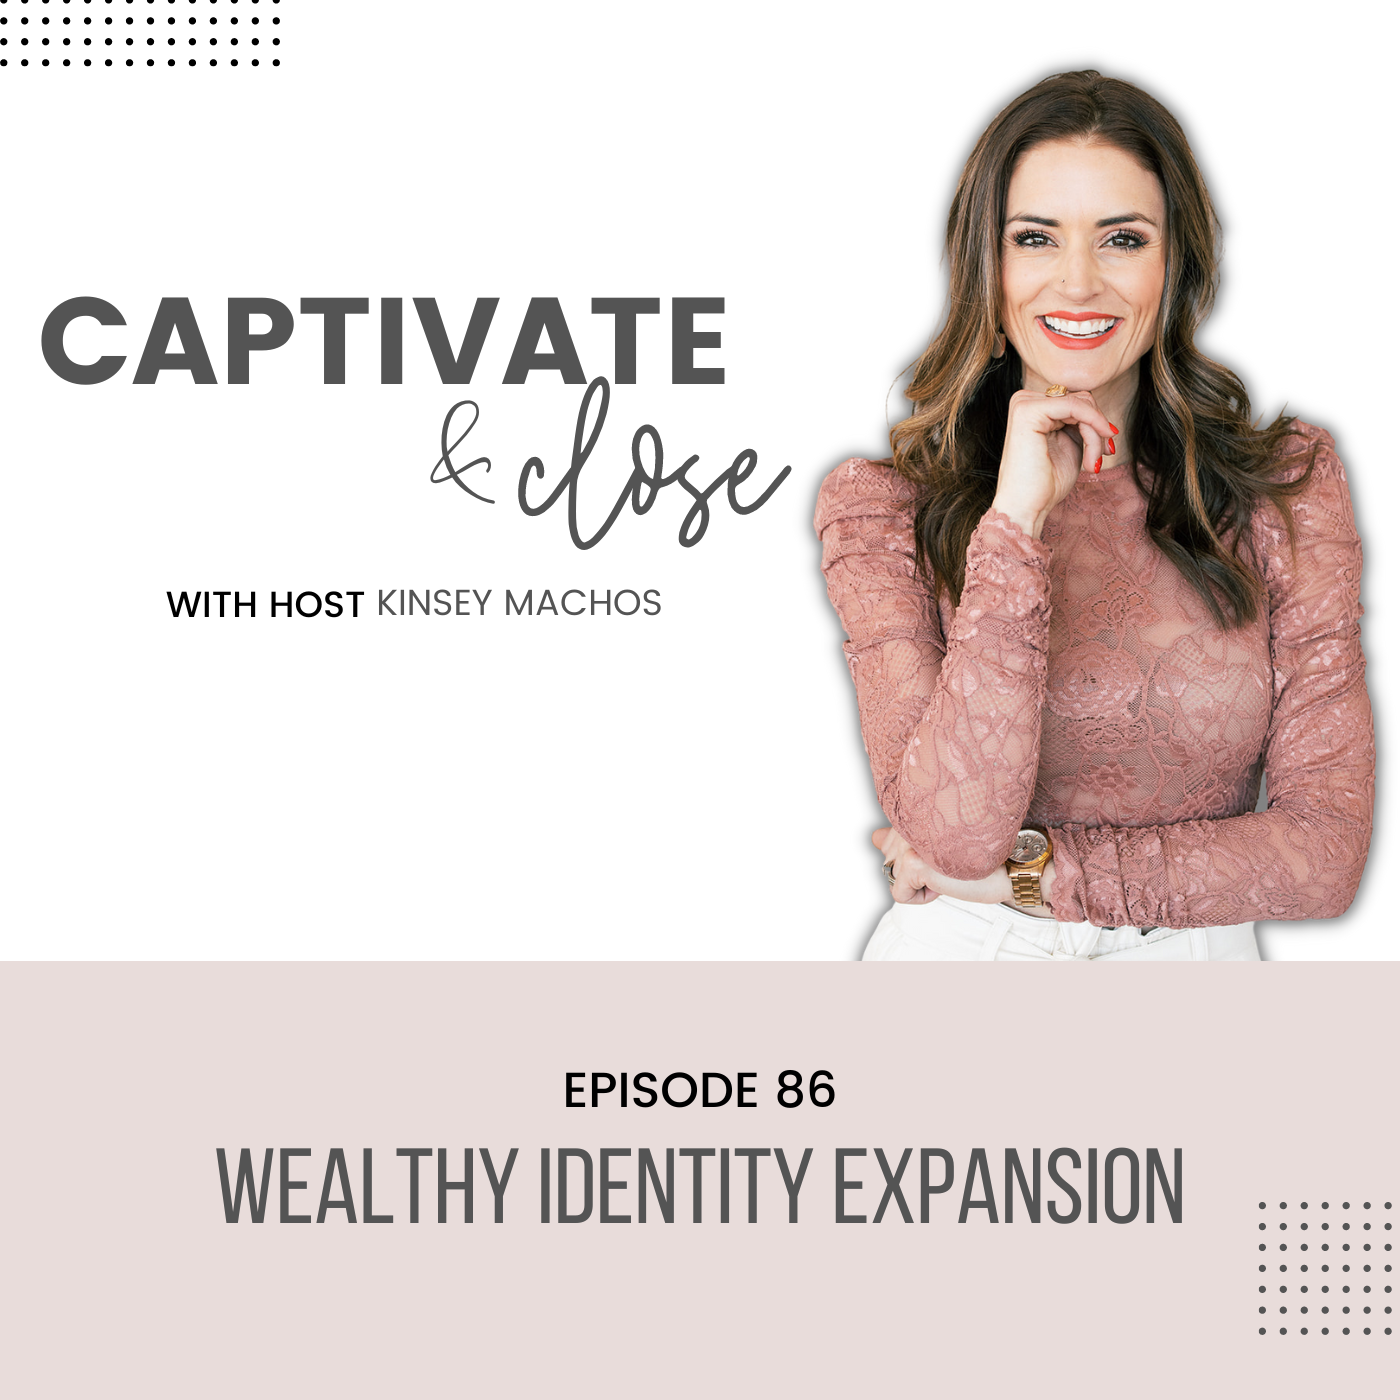 Wealthy Identity Expansion